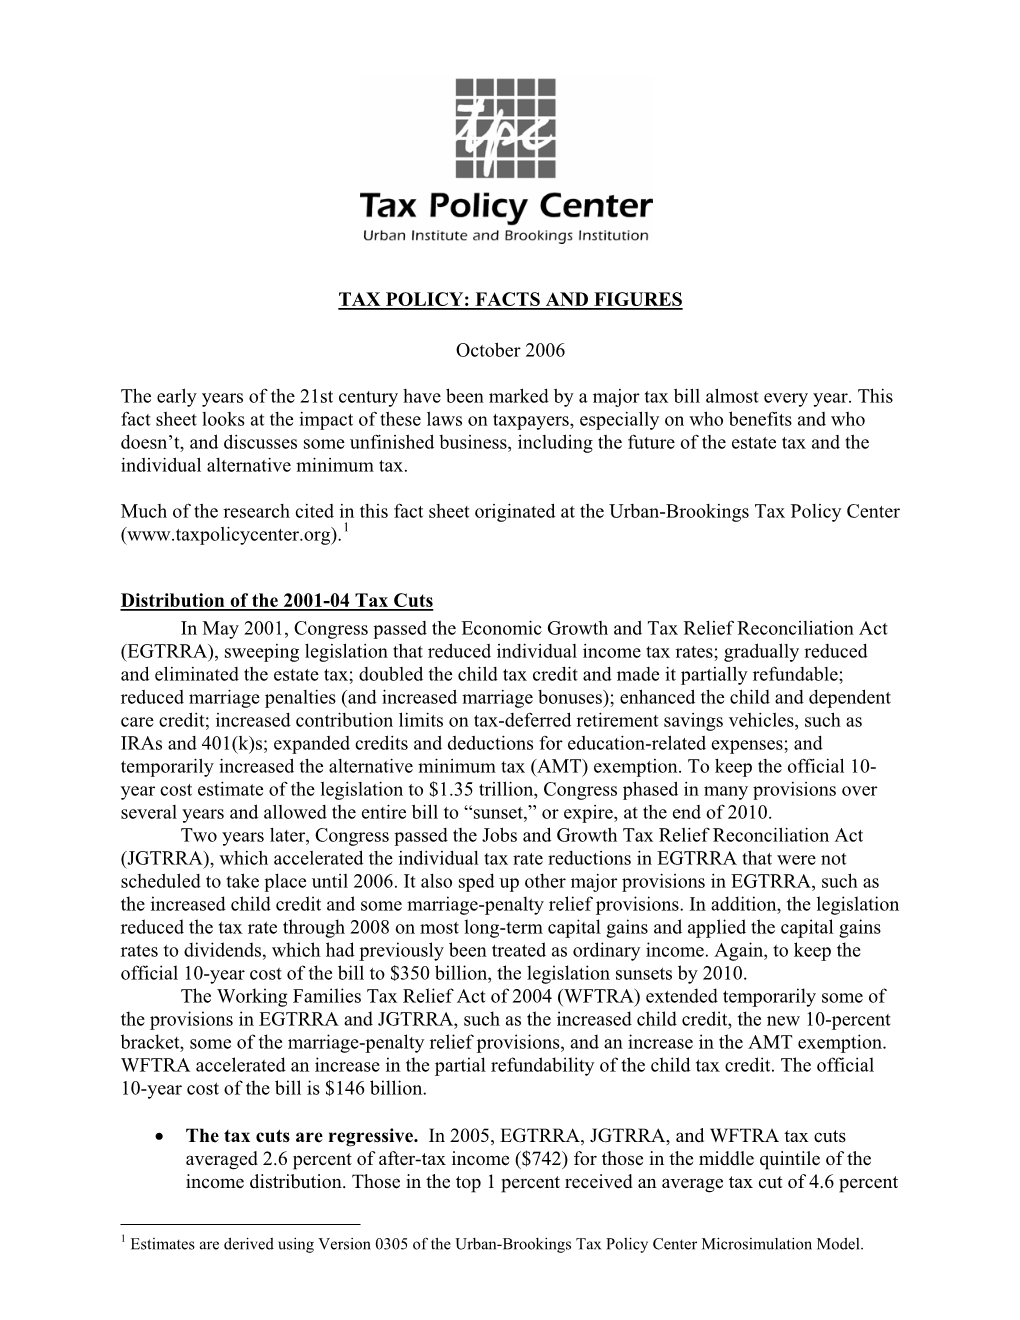 Tax Policy: Facts and Figures